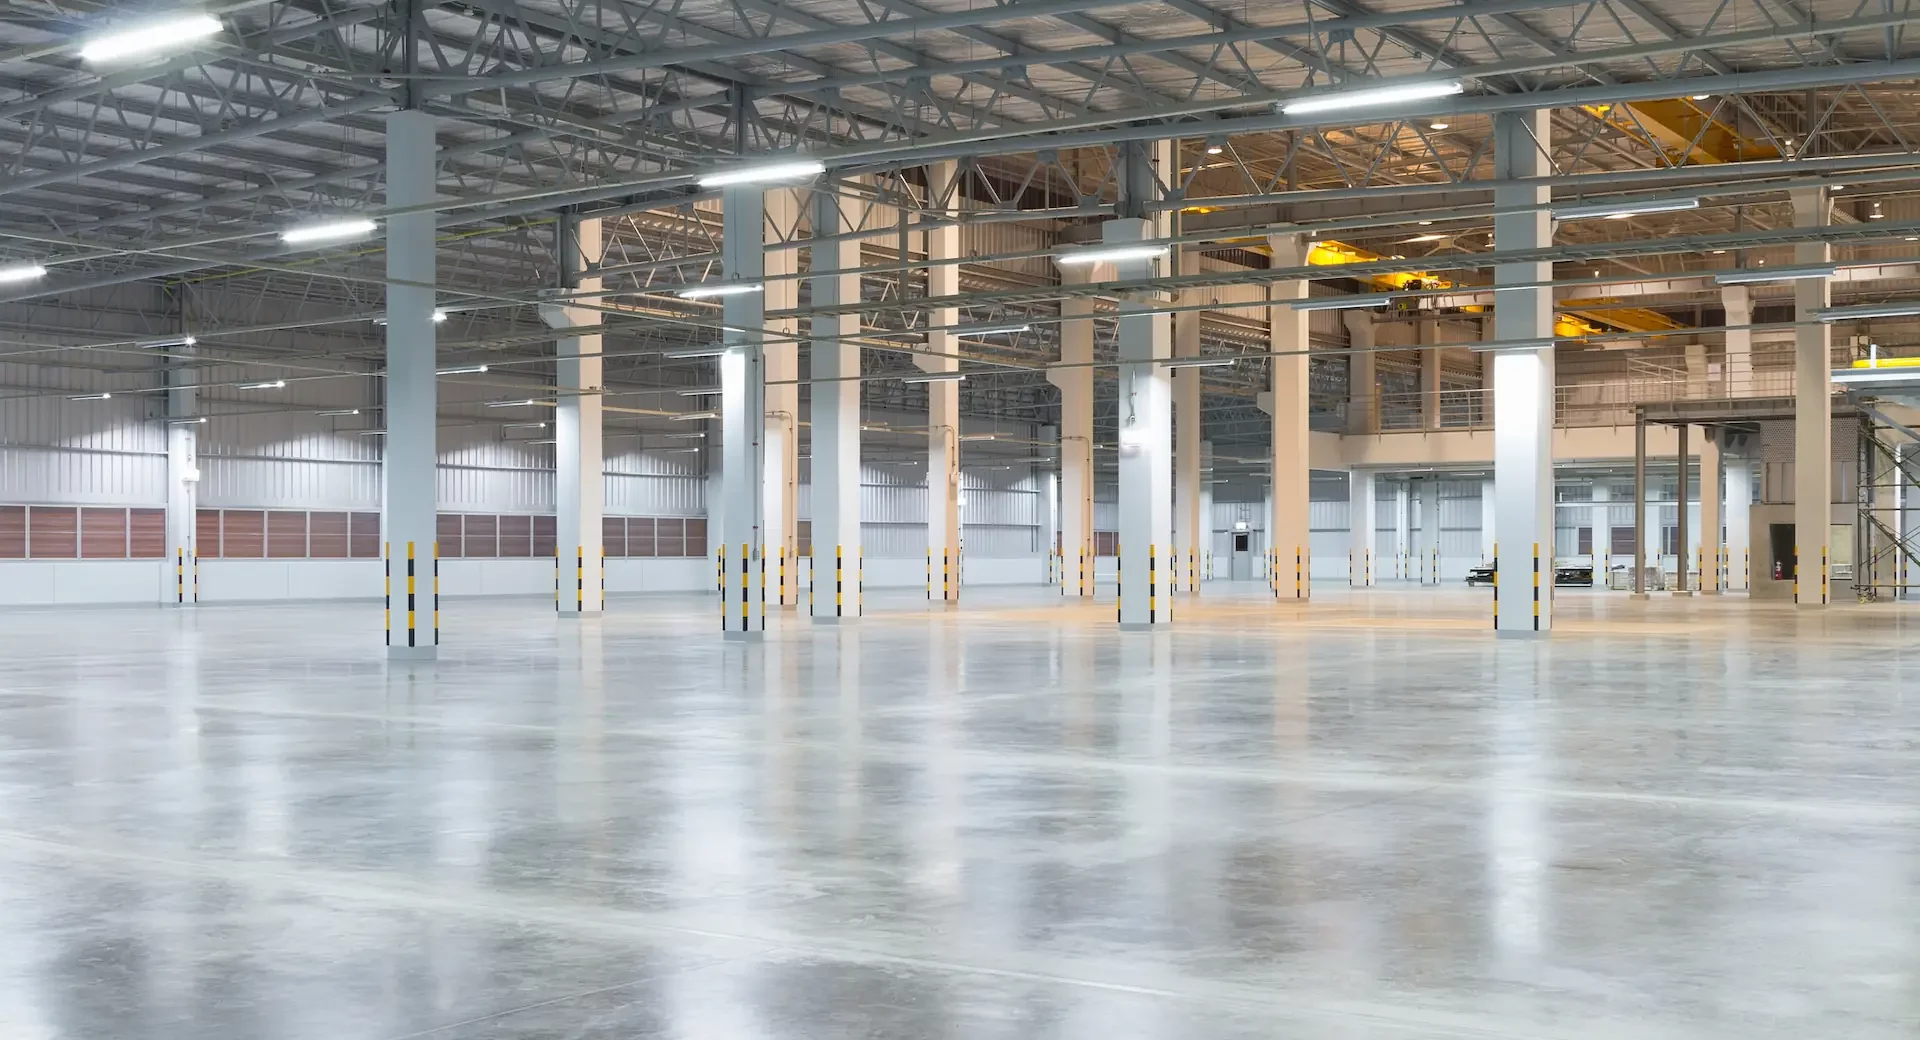 A large, industrial warehouse with concrete flooring sits open under fluorescent lighting.